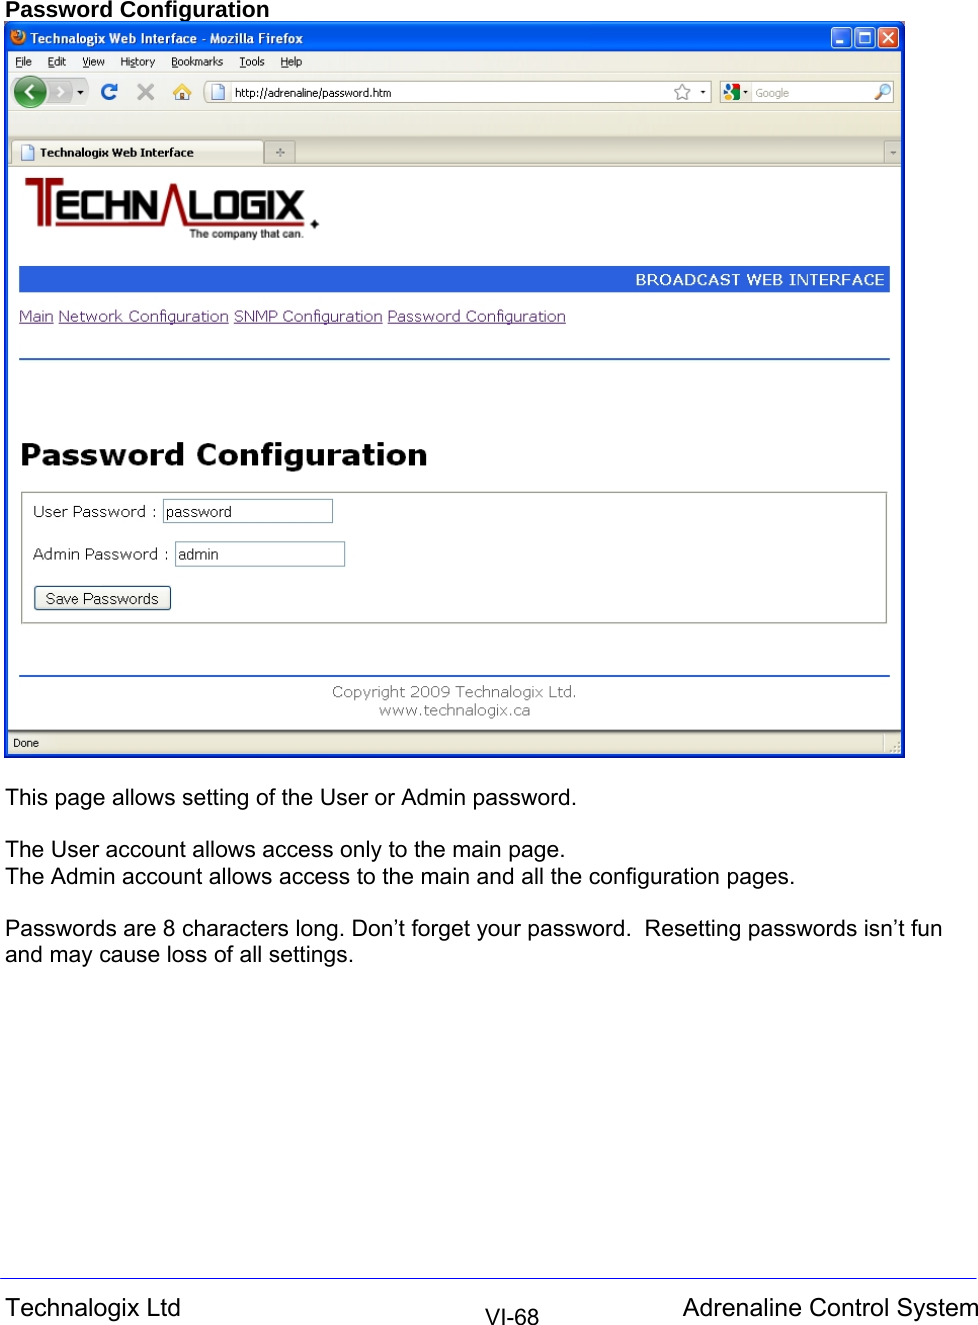  Technalogix Ltd  Adrenaline Control System  VI-68Password Configuration   This page allows setting of the User or Admin password.  The User account allows access only to the main page. The Admin account allows access to the main and all the configuration pages.  Passwords are 8 characters long. Don’t forget your password.  Resetting passwords isn’t fun and may cause loss of all settings.           